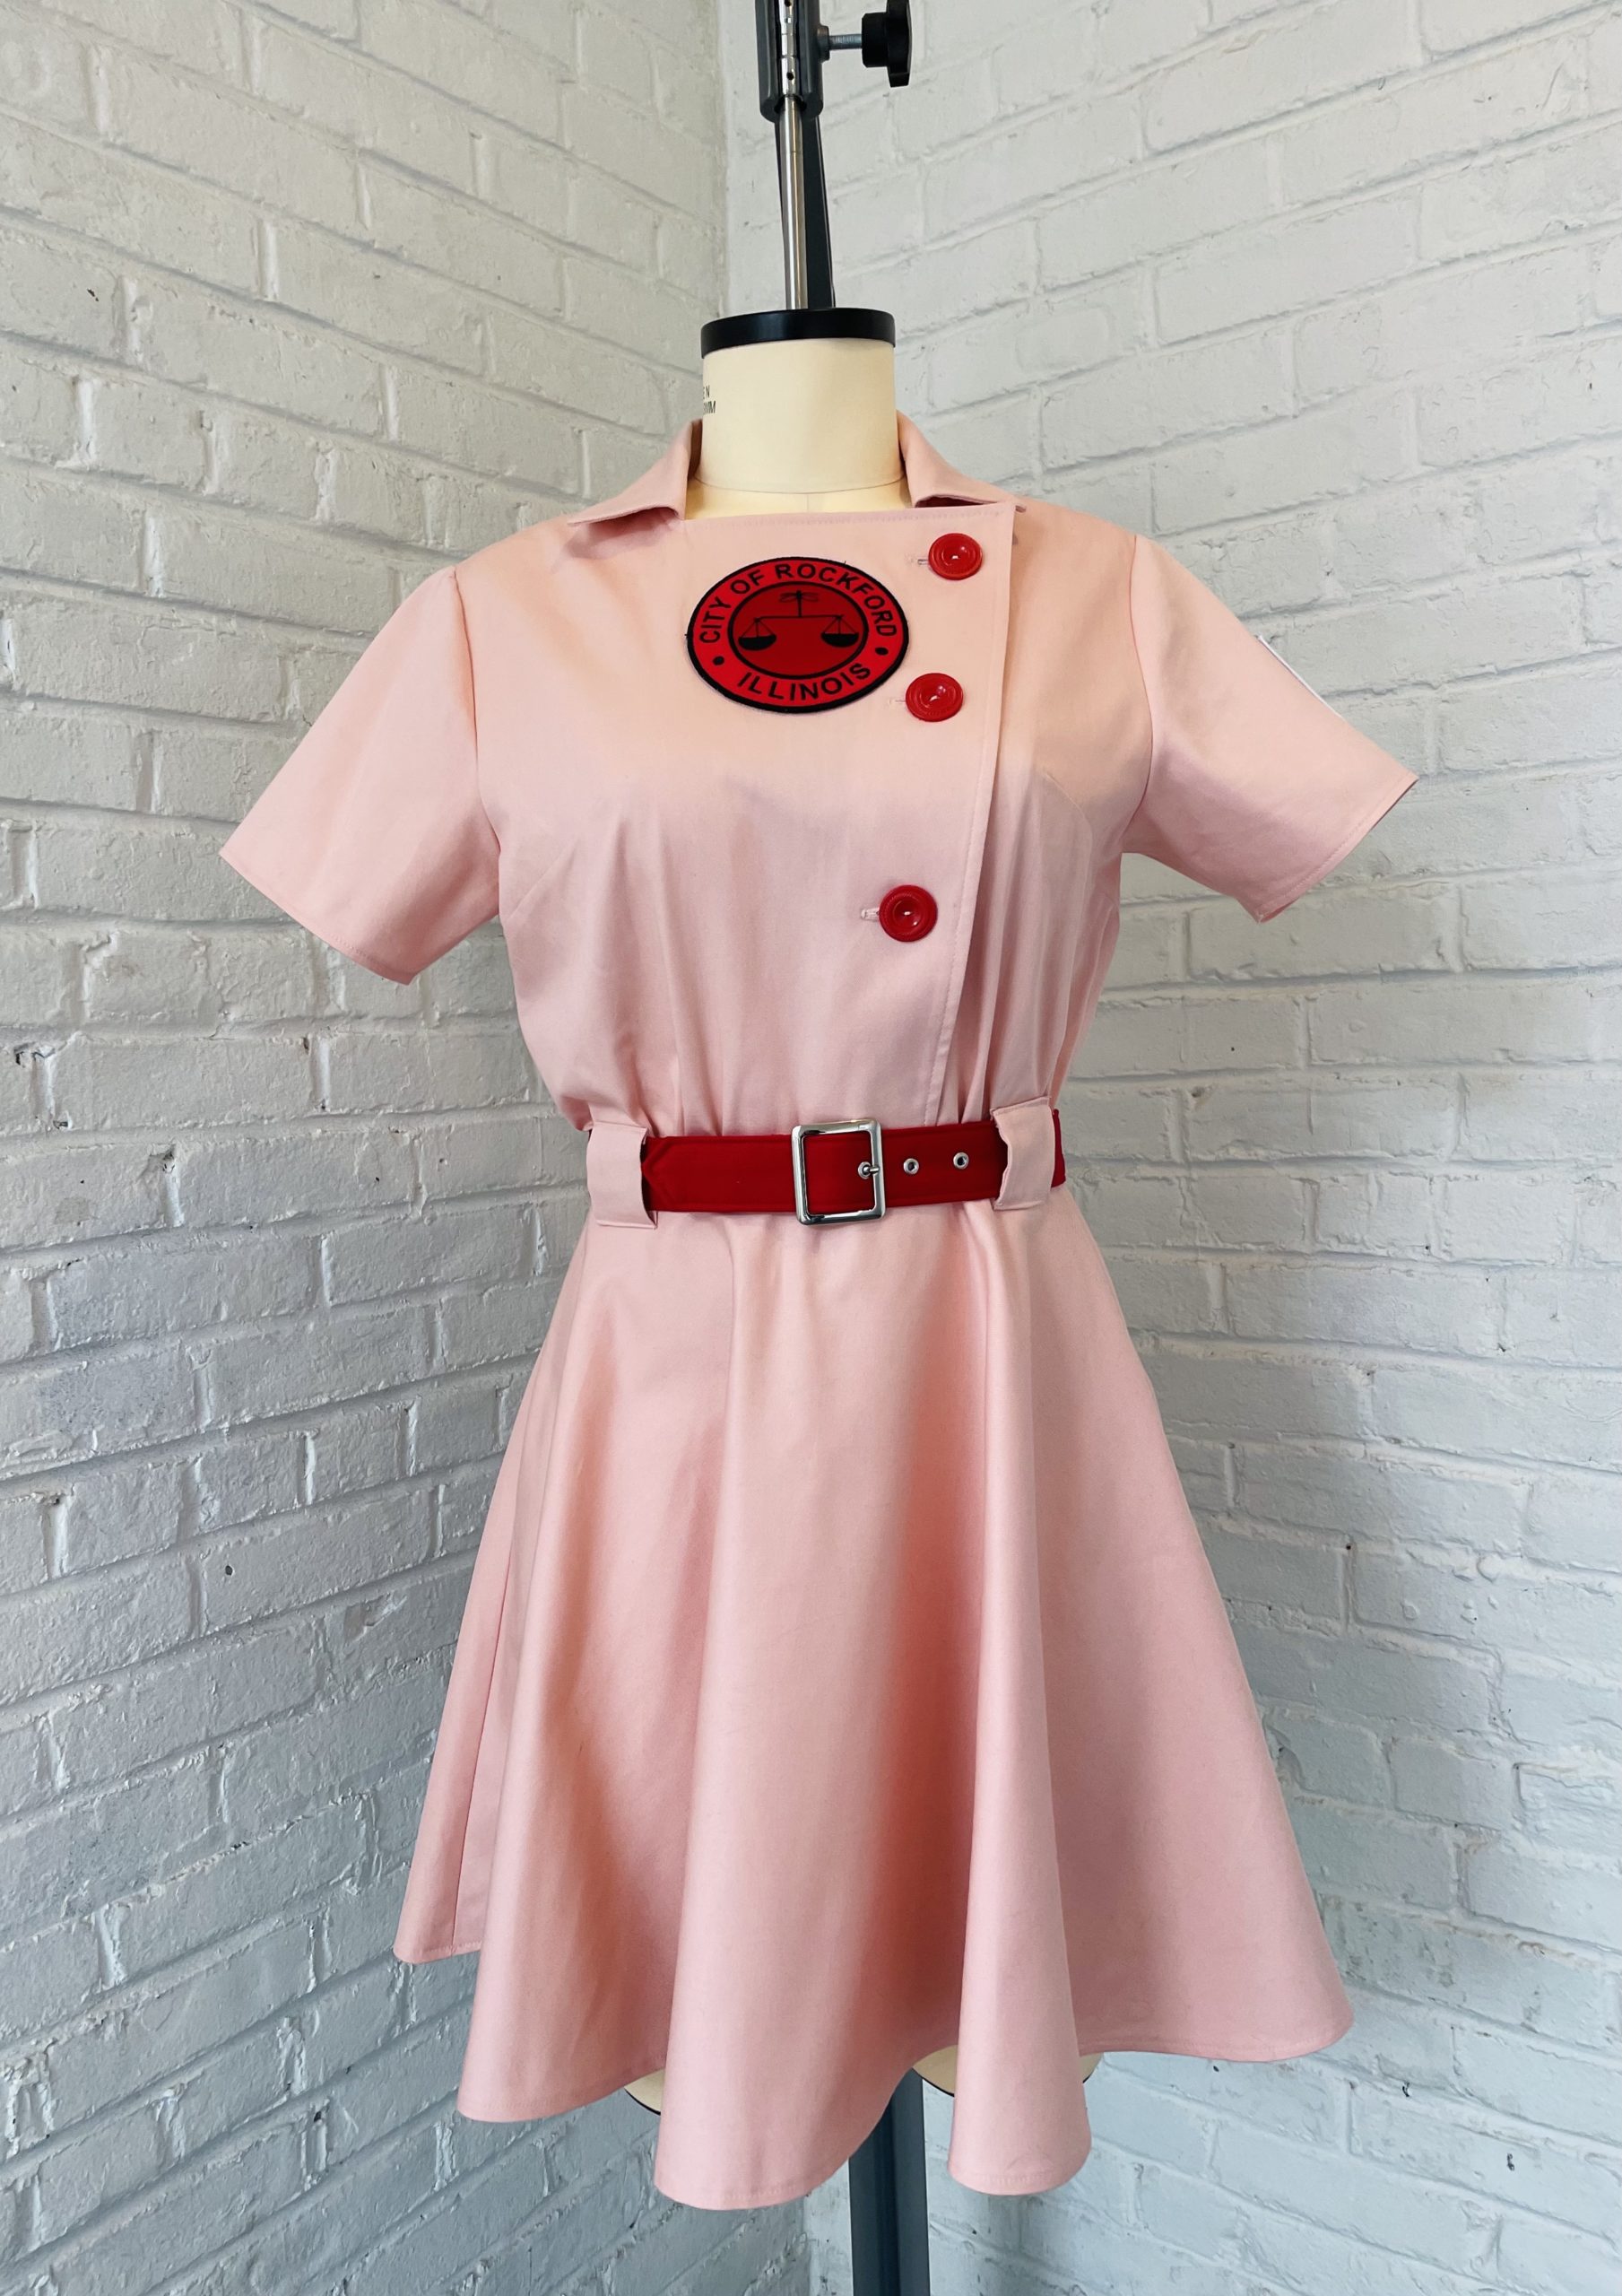 Rockford Peaches Halloween Costume, Part Two: Sewing! - Charm Patterns